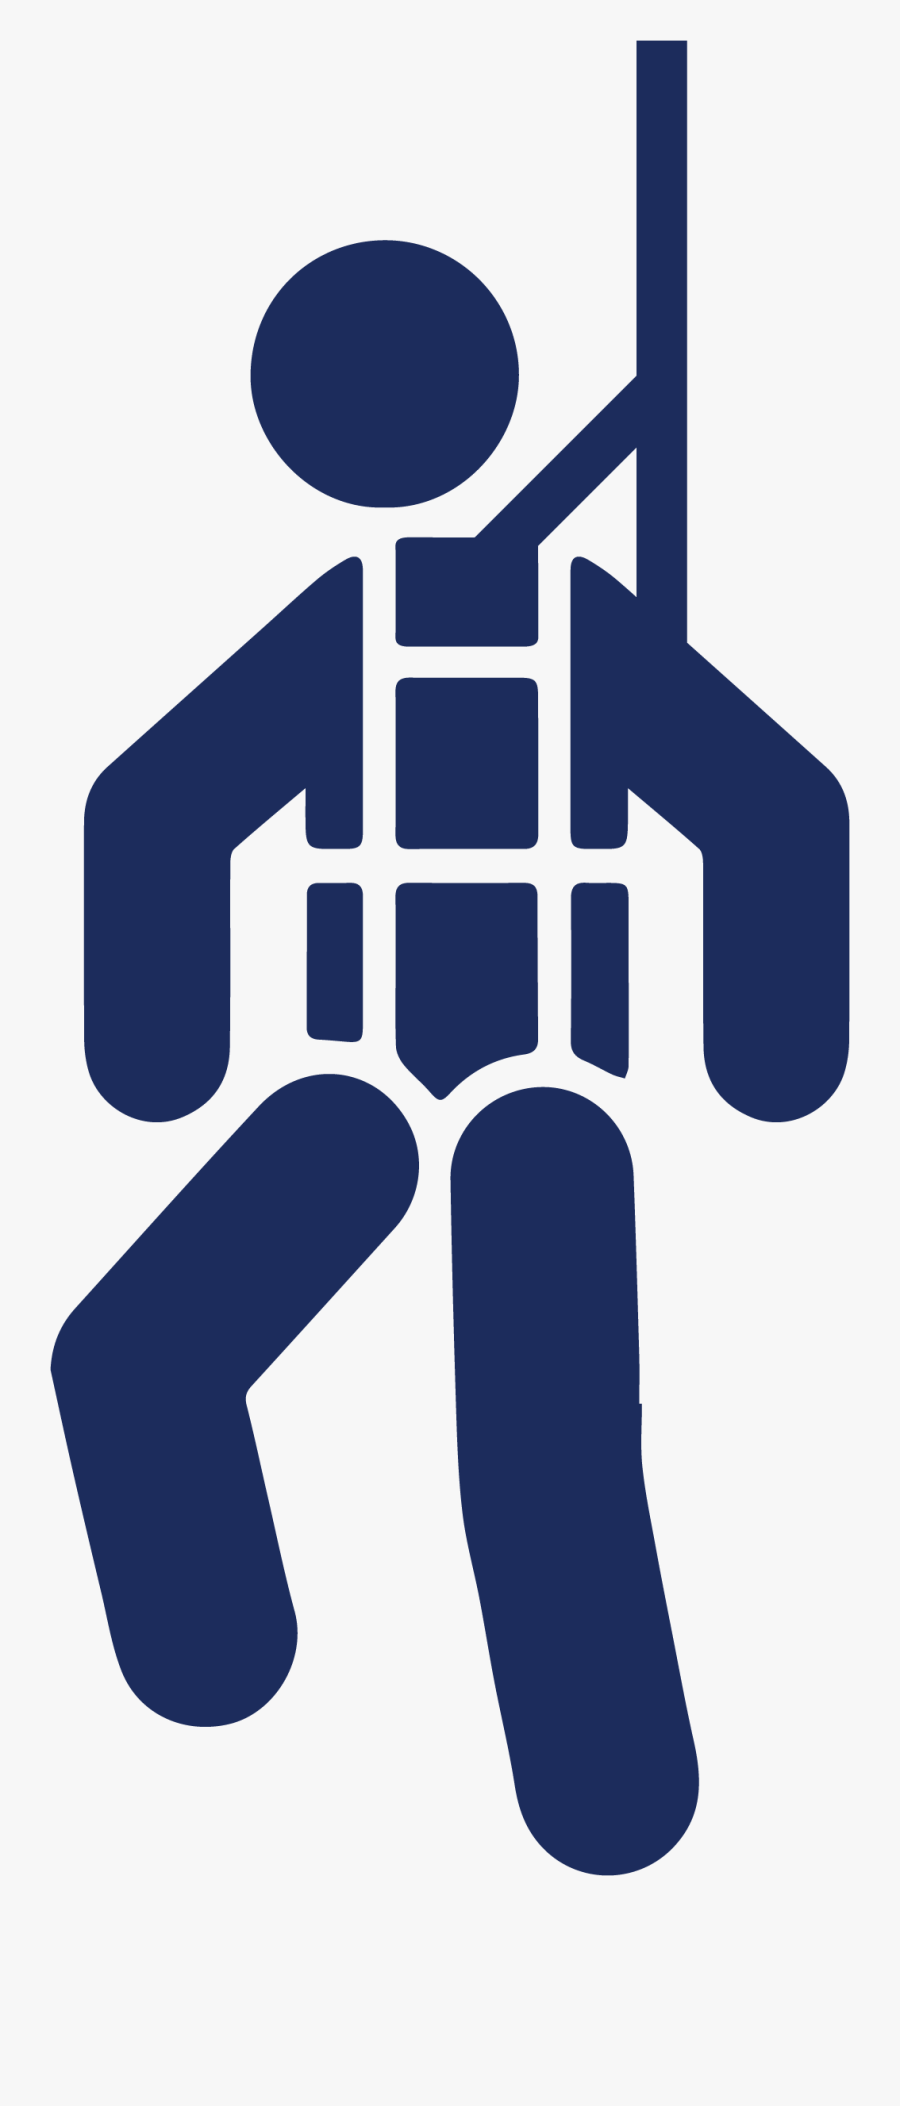 Fall Protection Trained, Transparent Clipart